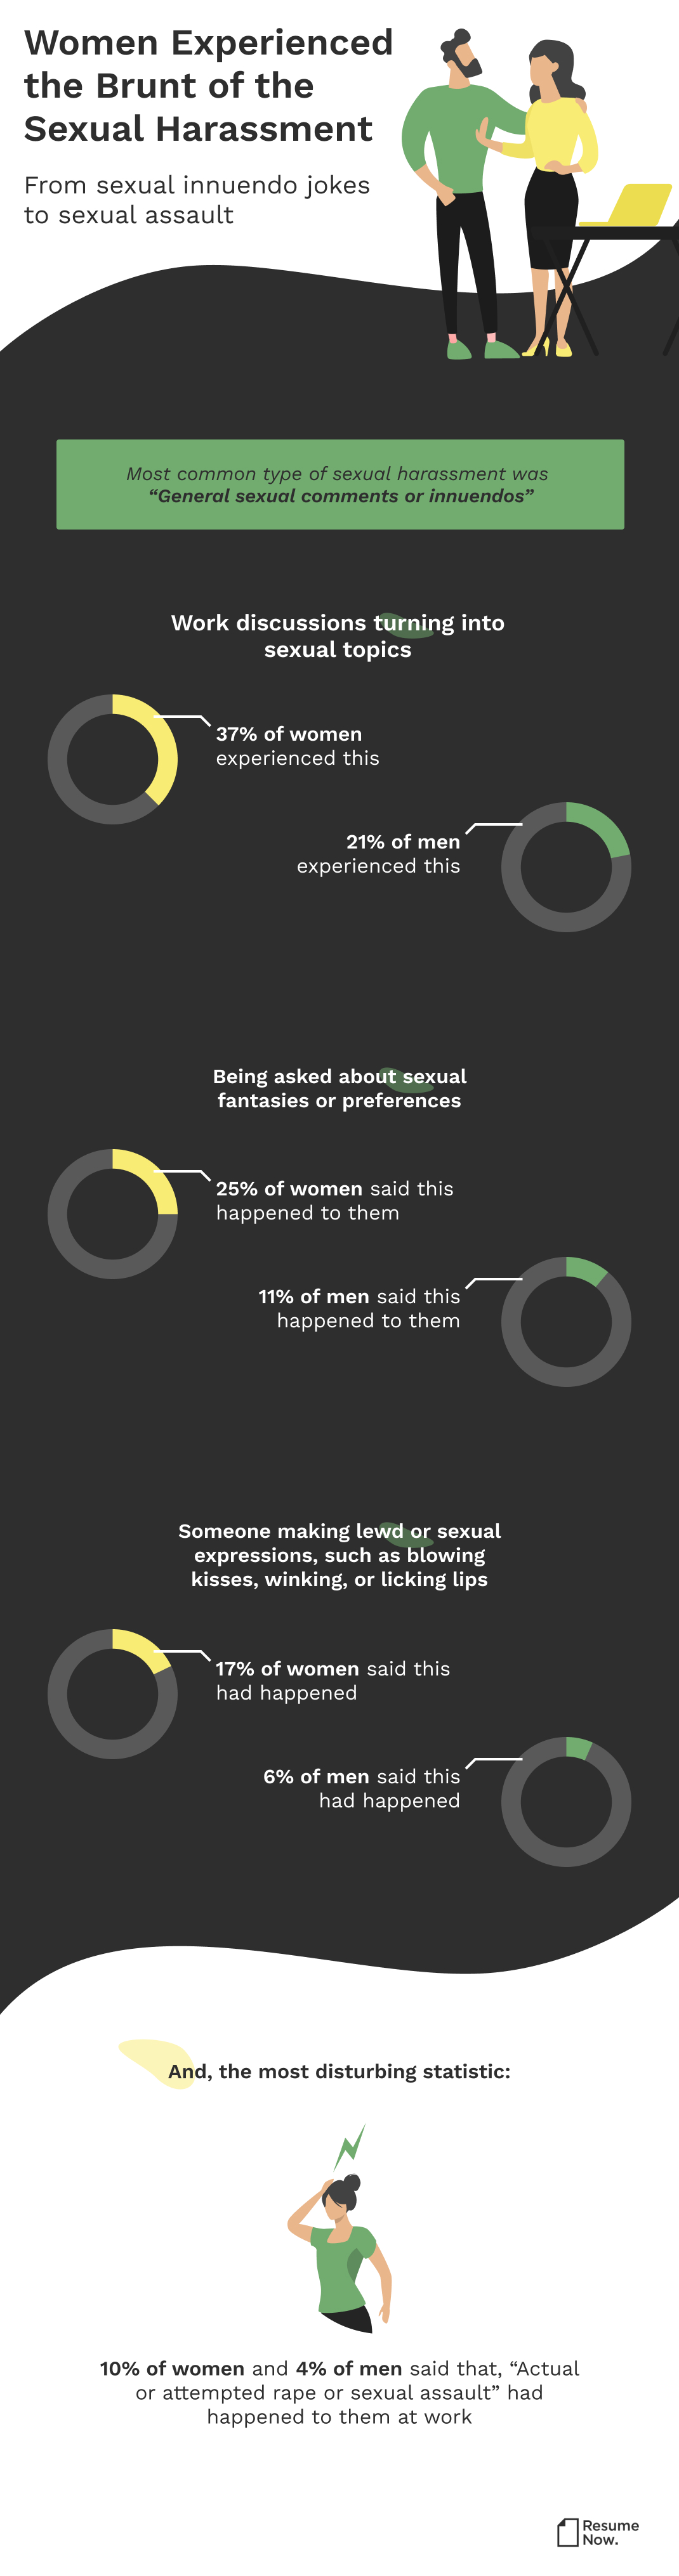 Resume Now looks at the types of sexual harassment women detailed receiving in the workplace, according to research